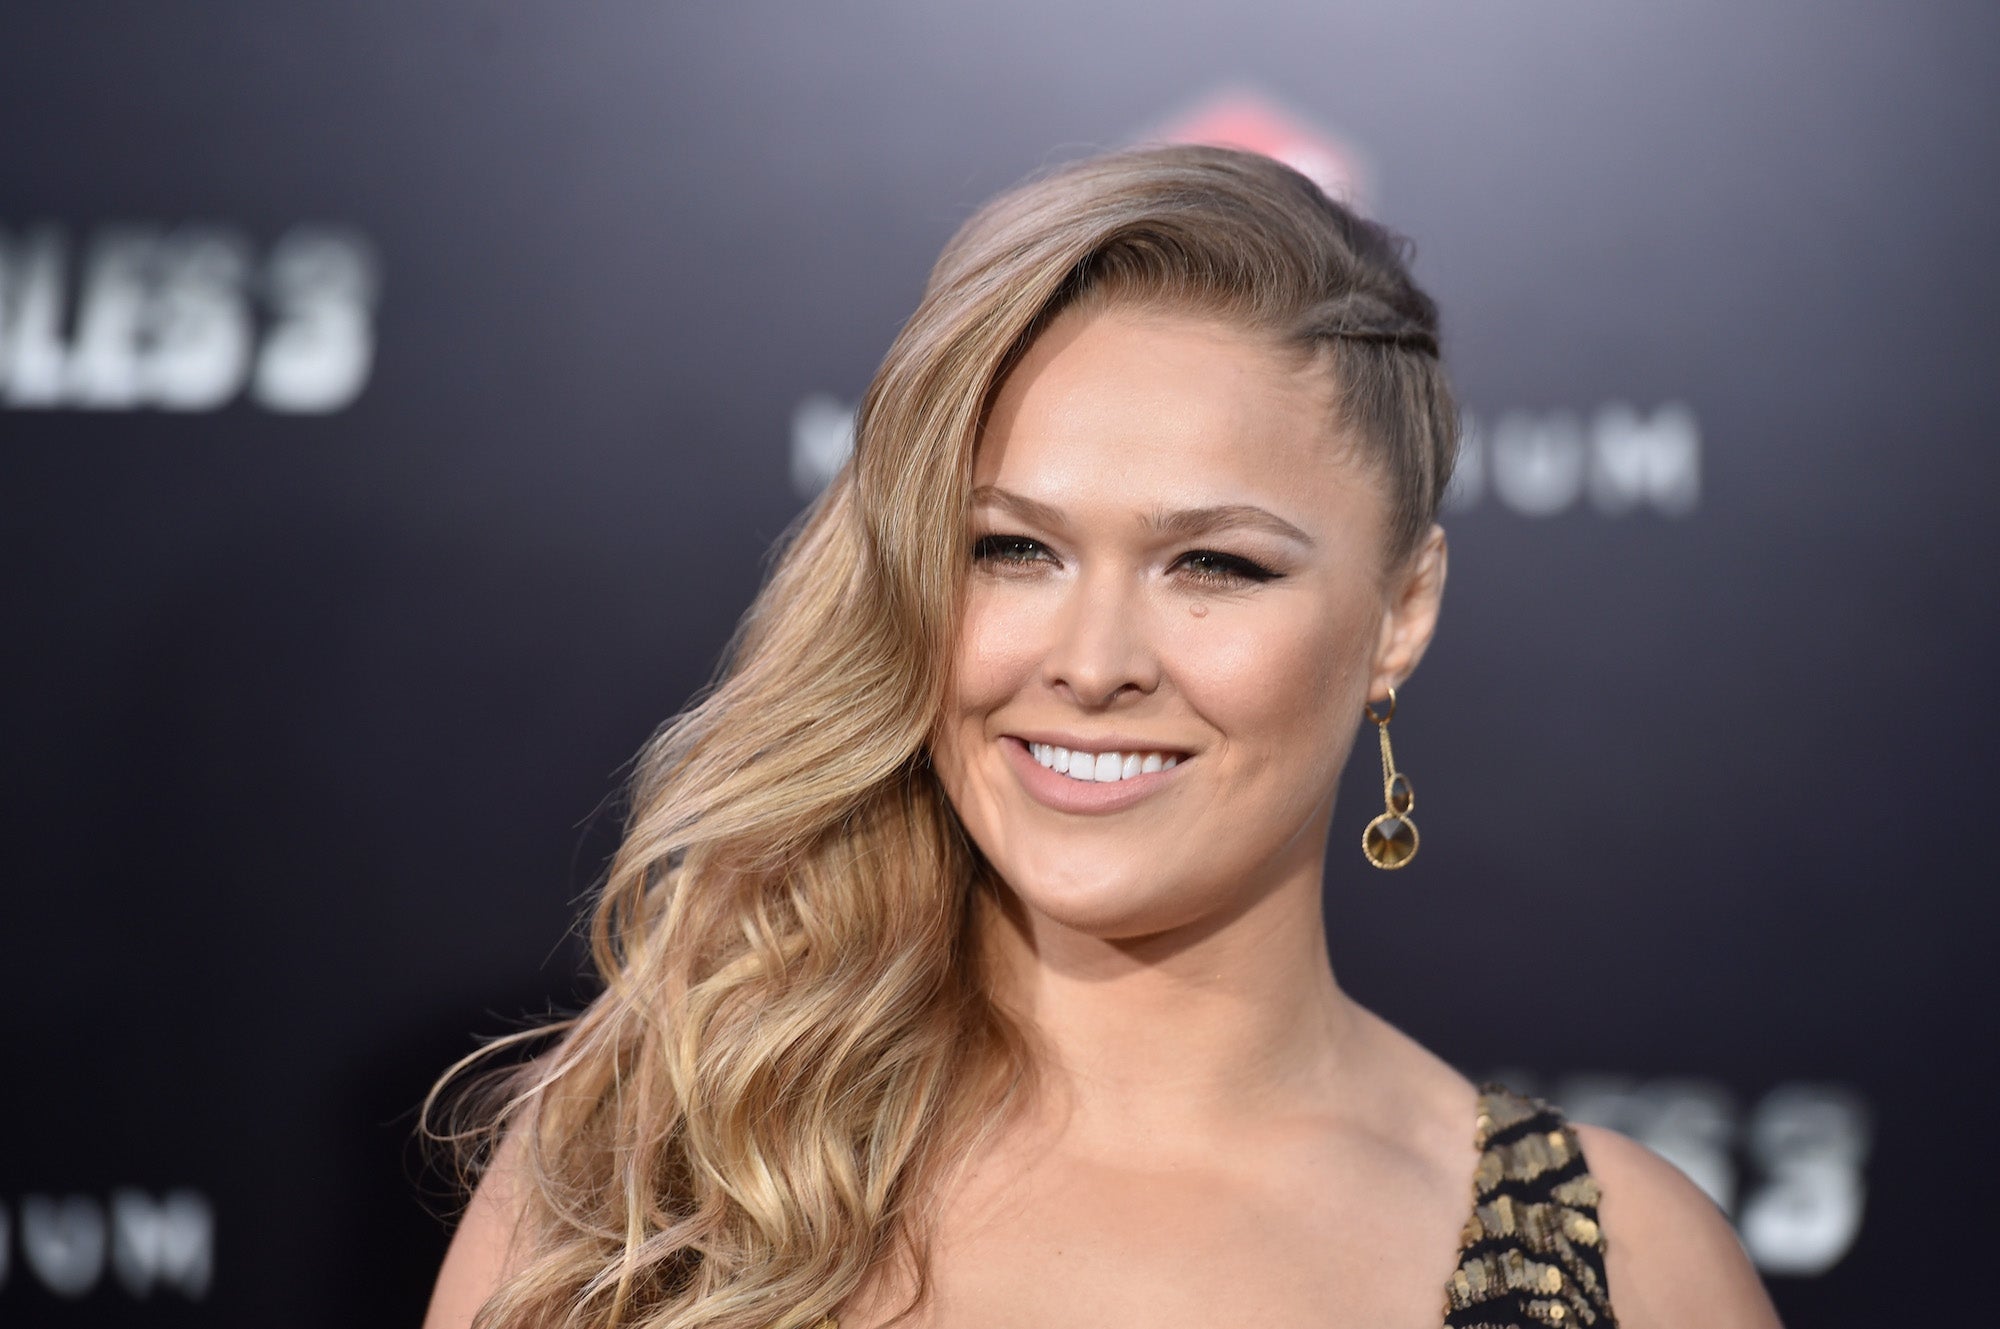 Ronda Rousey attends the premiere for ' 'The Expendables 3' in Los Angeles.